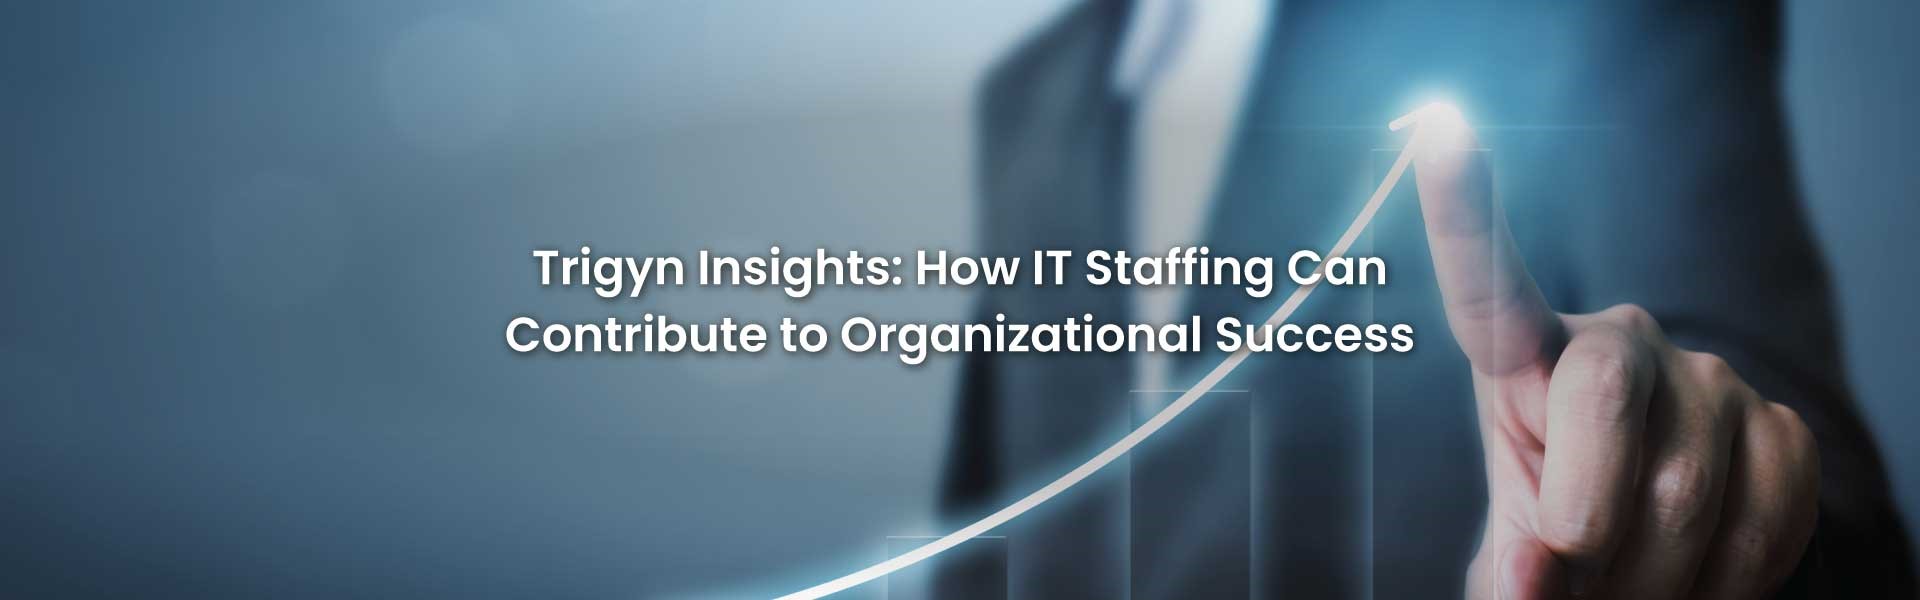 Contribute of IT Staffing to Organizational Success 